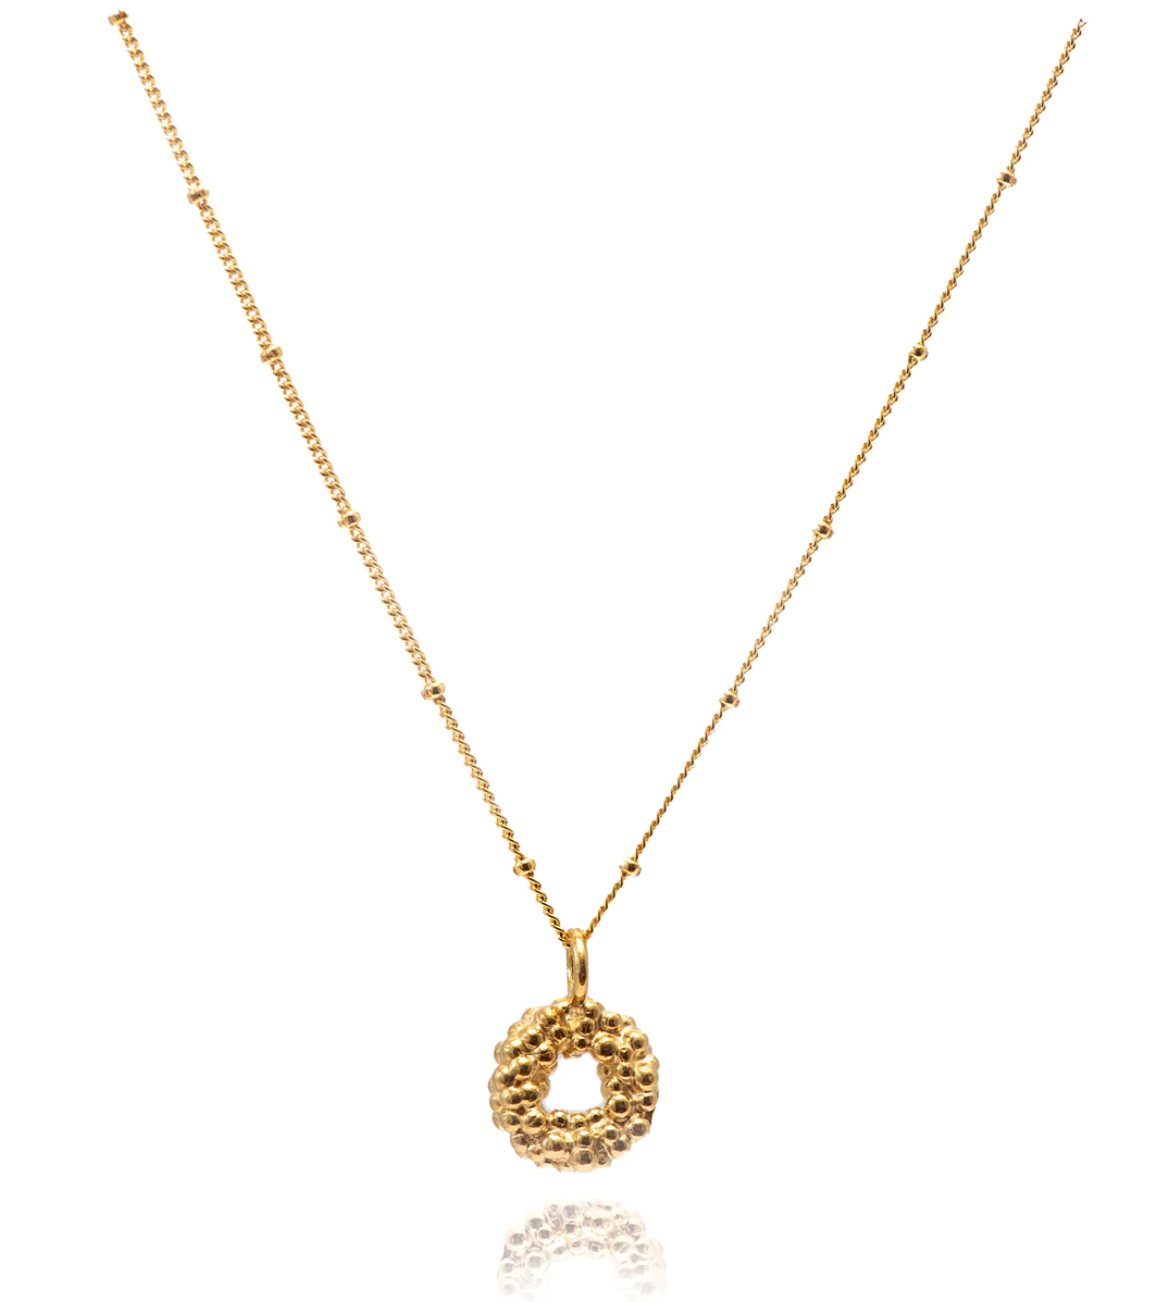 DAINTY LONDON SOLID GOLD BARNACLE NECKLACE